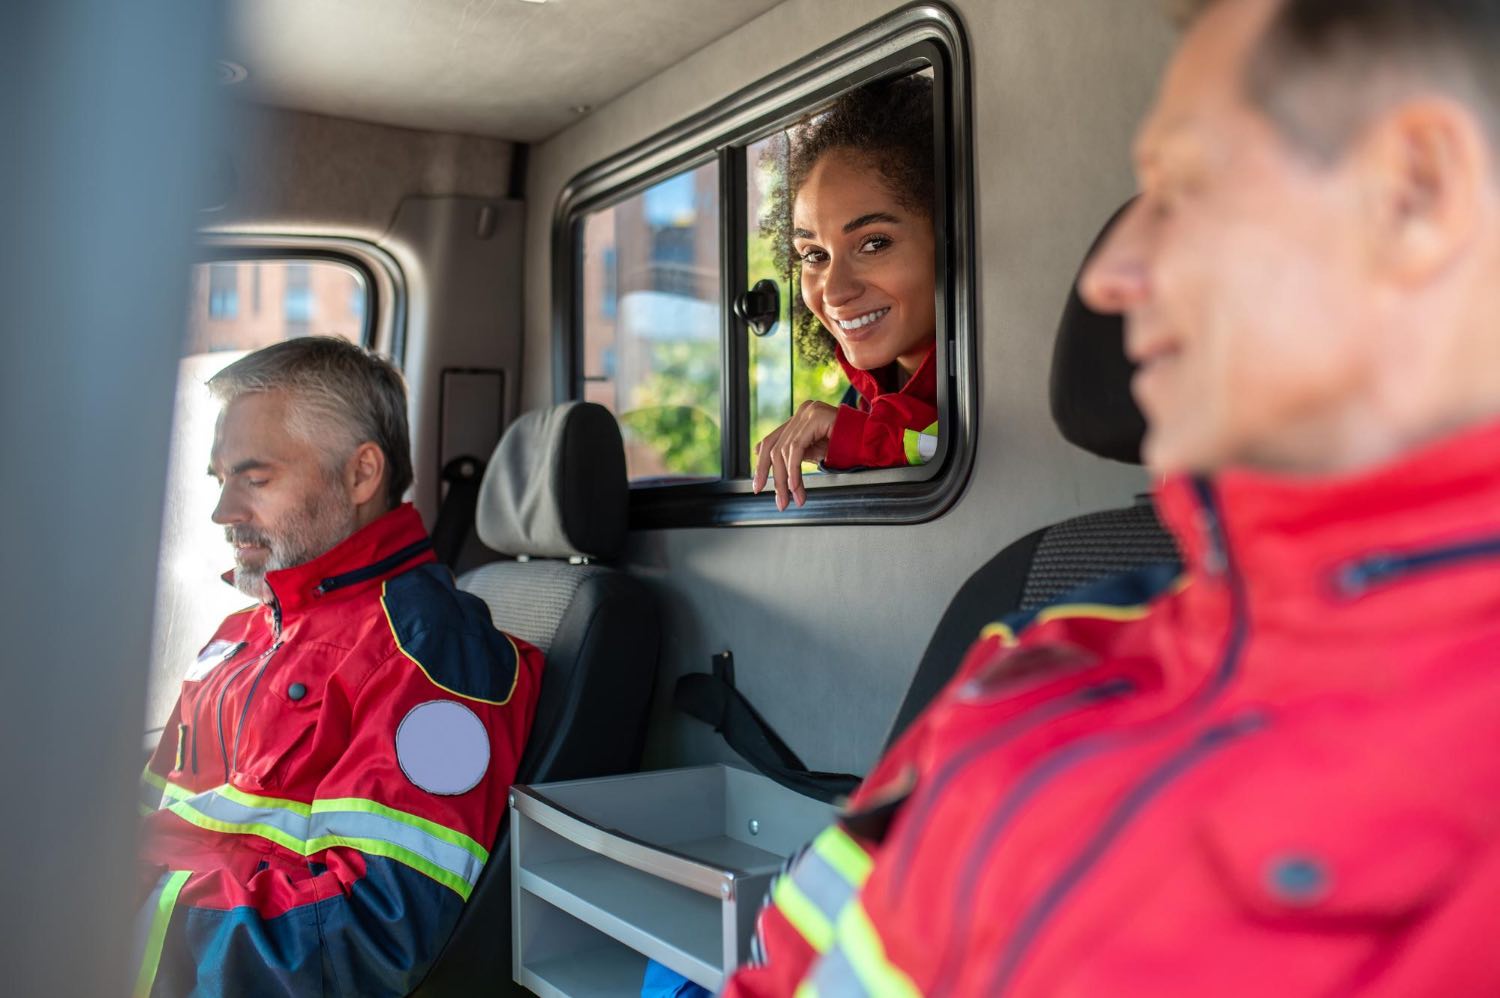 team-smiling-pleased-paramedics-red-uniforms-sitting-together-medical-emergency-vehicle